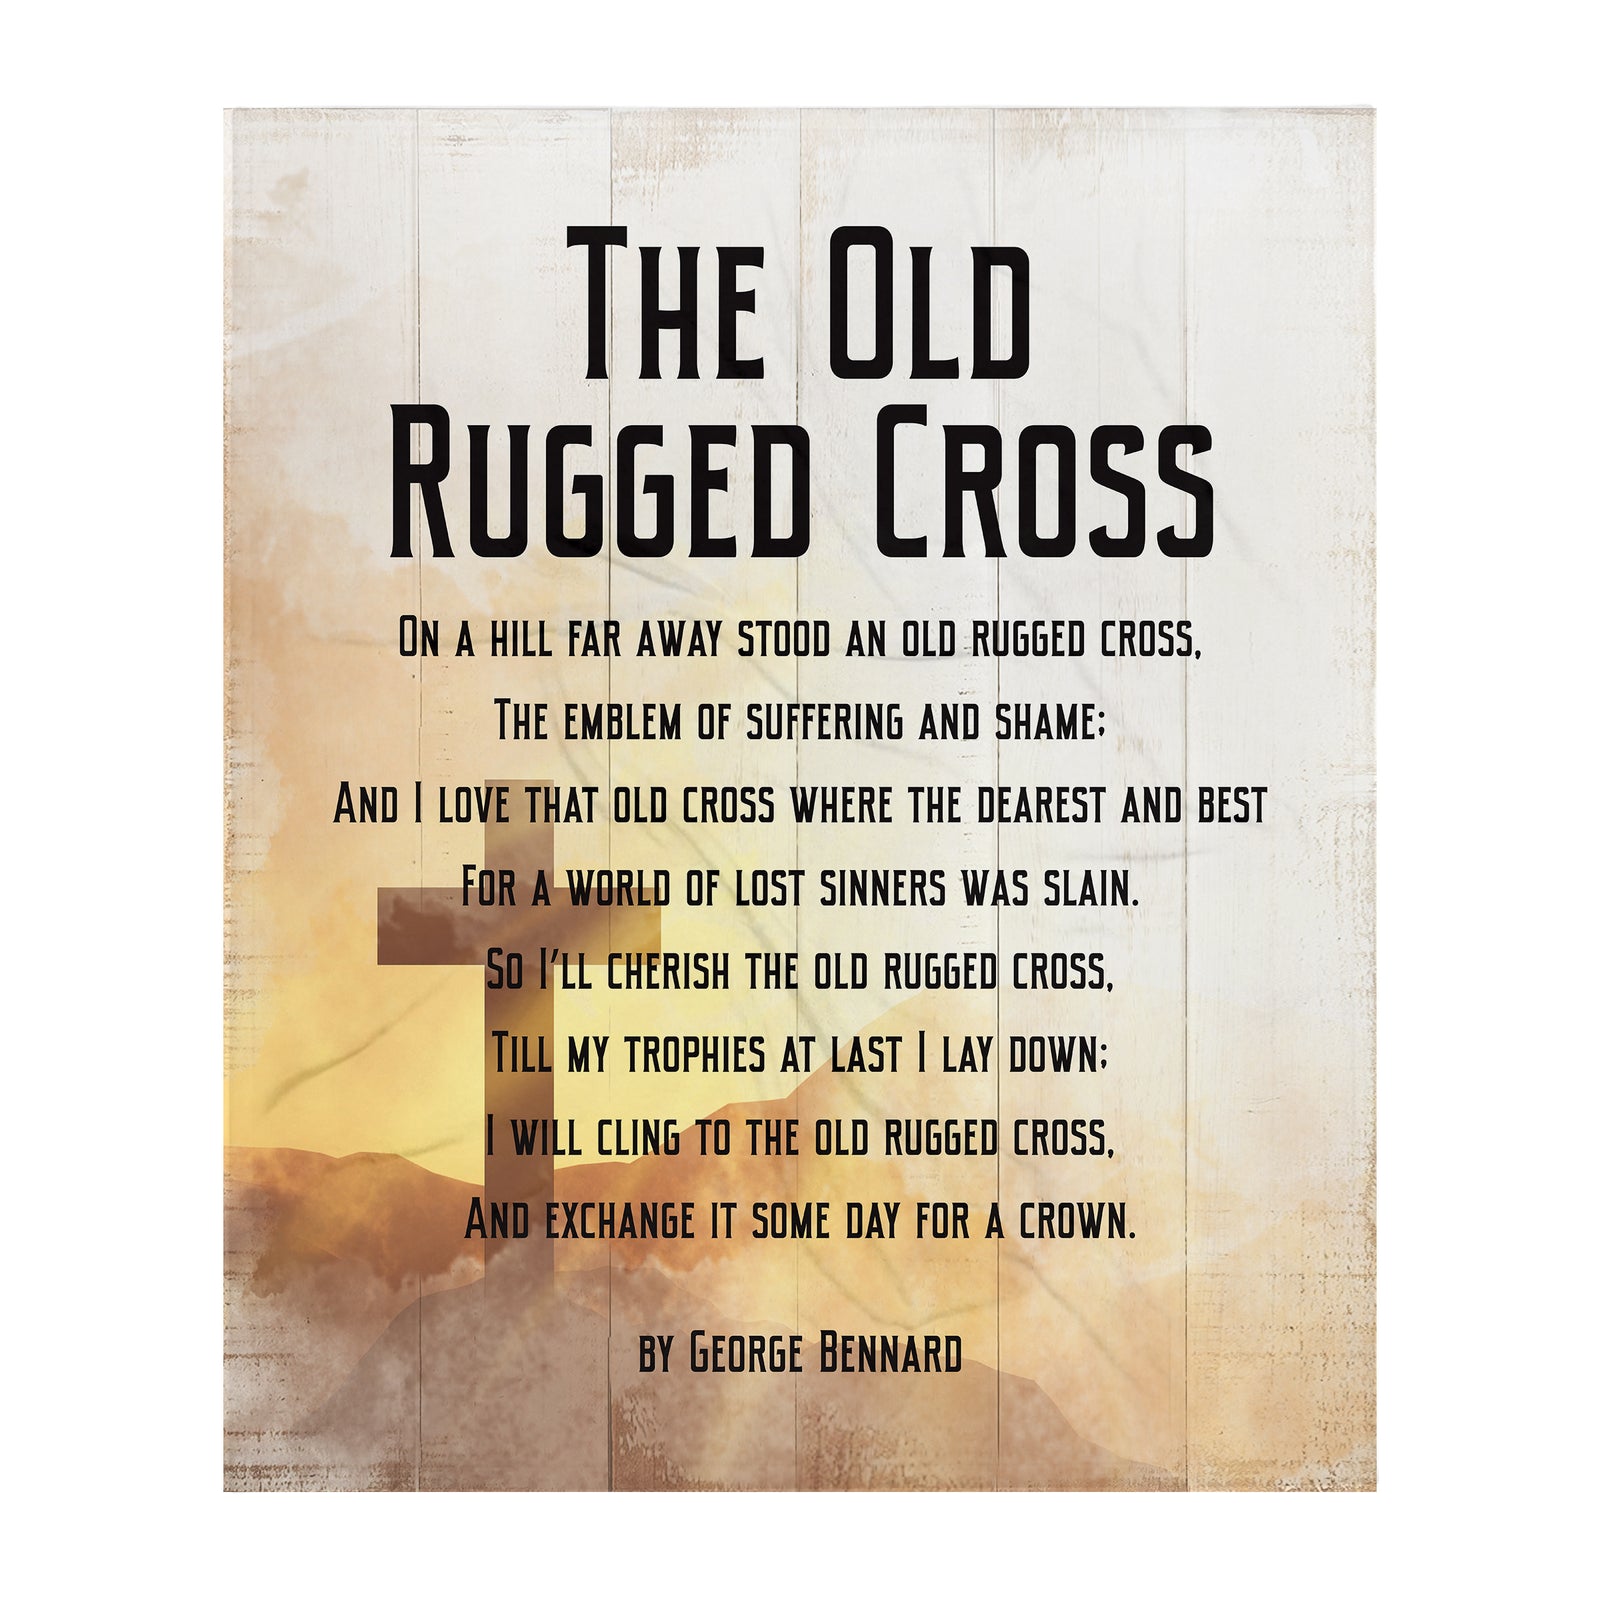 Vintage-Inspired Throw Blanket For Home Décor & Gift Ideas - The Old Rugged Cross 1